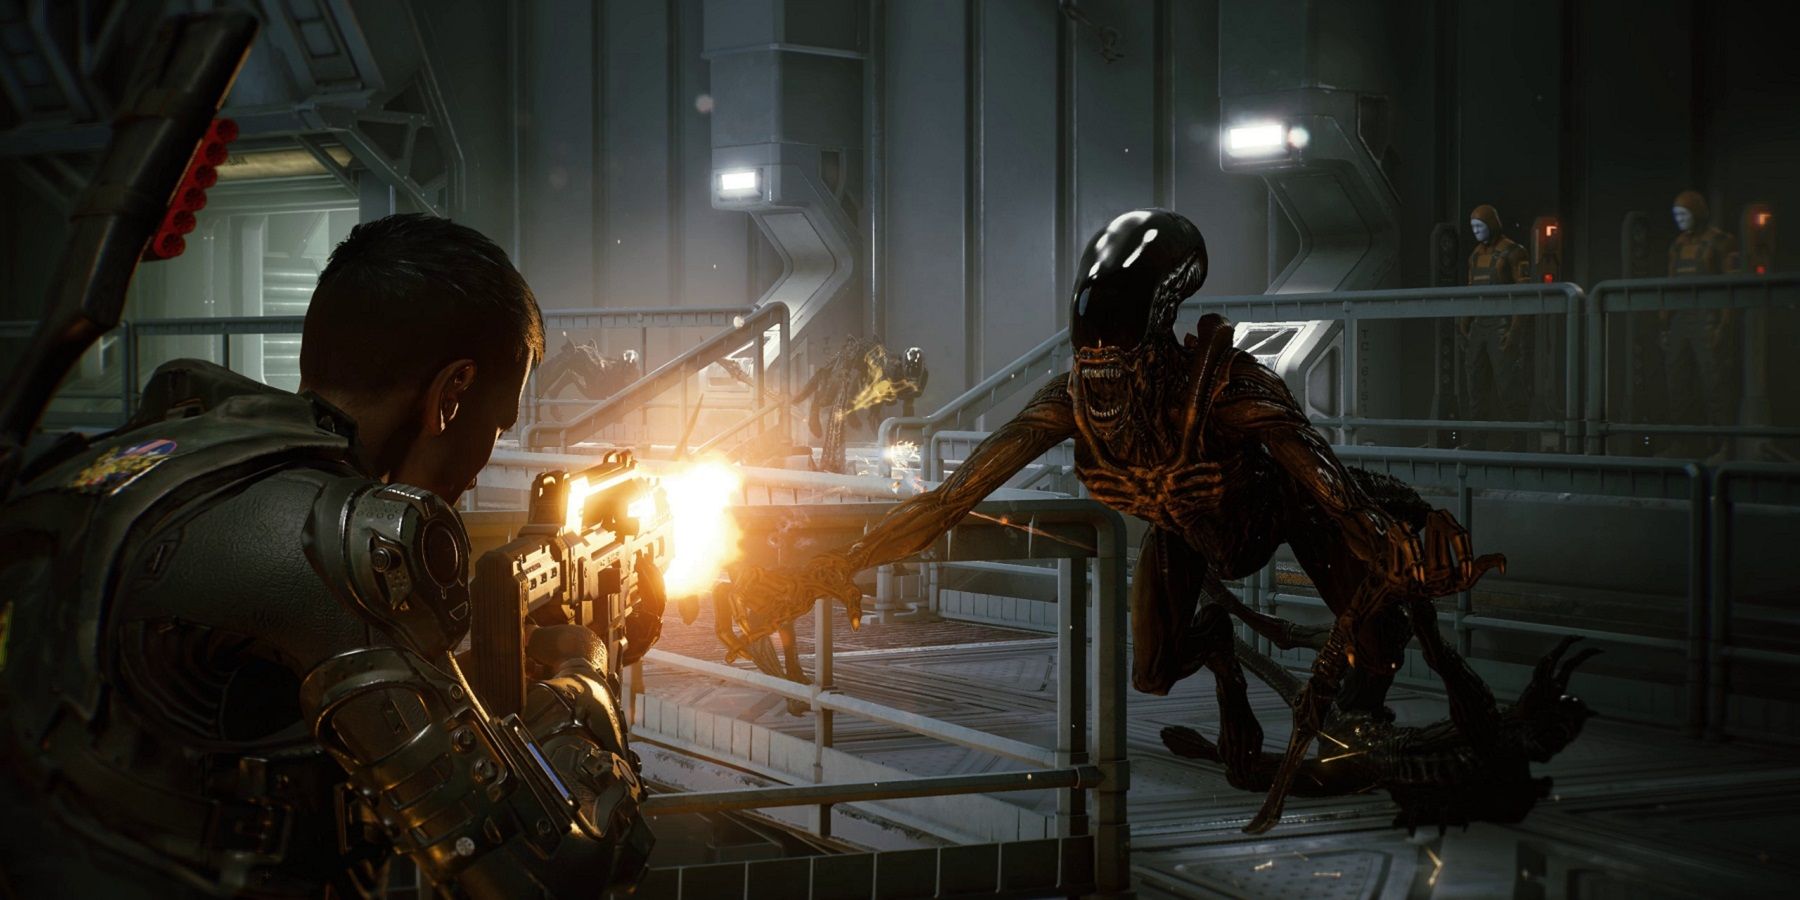 Screenshot from Aliens: Fireteam Elite showing a Xenomorph about to attack a marine.